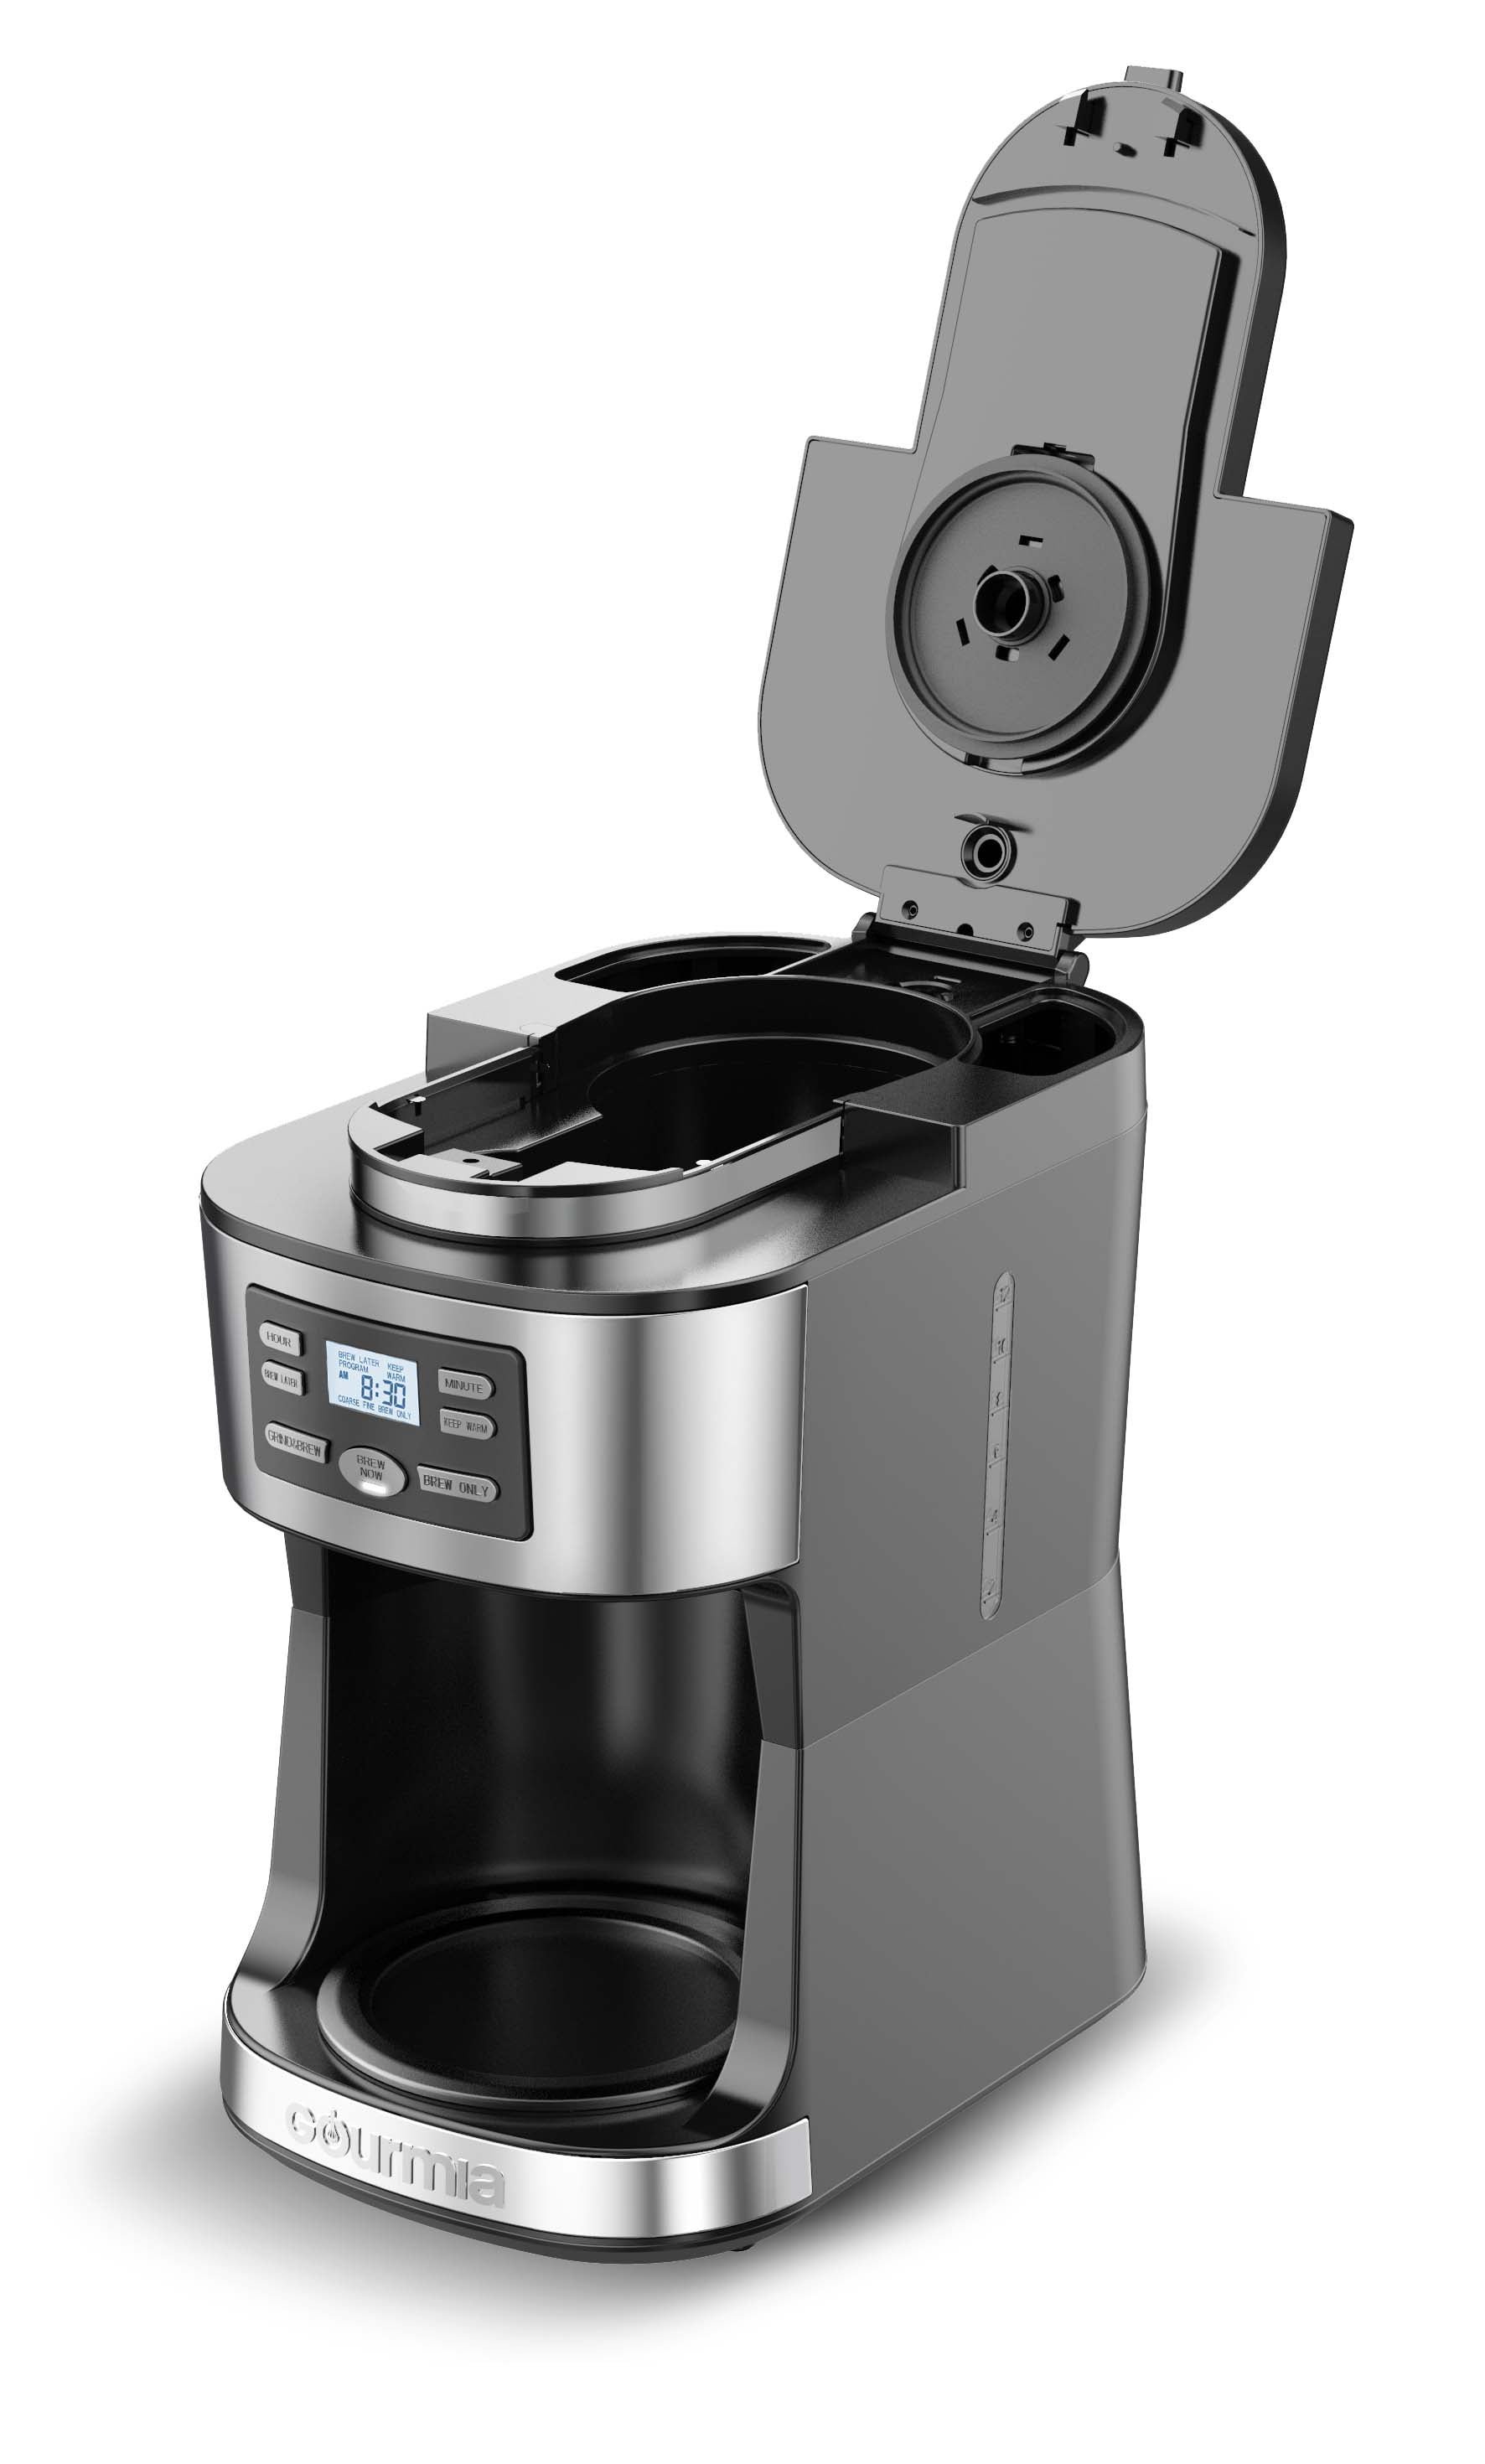 Gourmia 12-Cup Grind & Brew Coffee Maker with Integrated Grinder